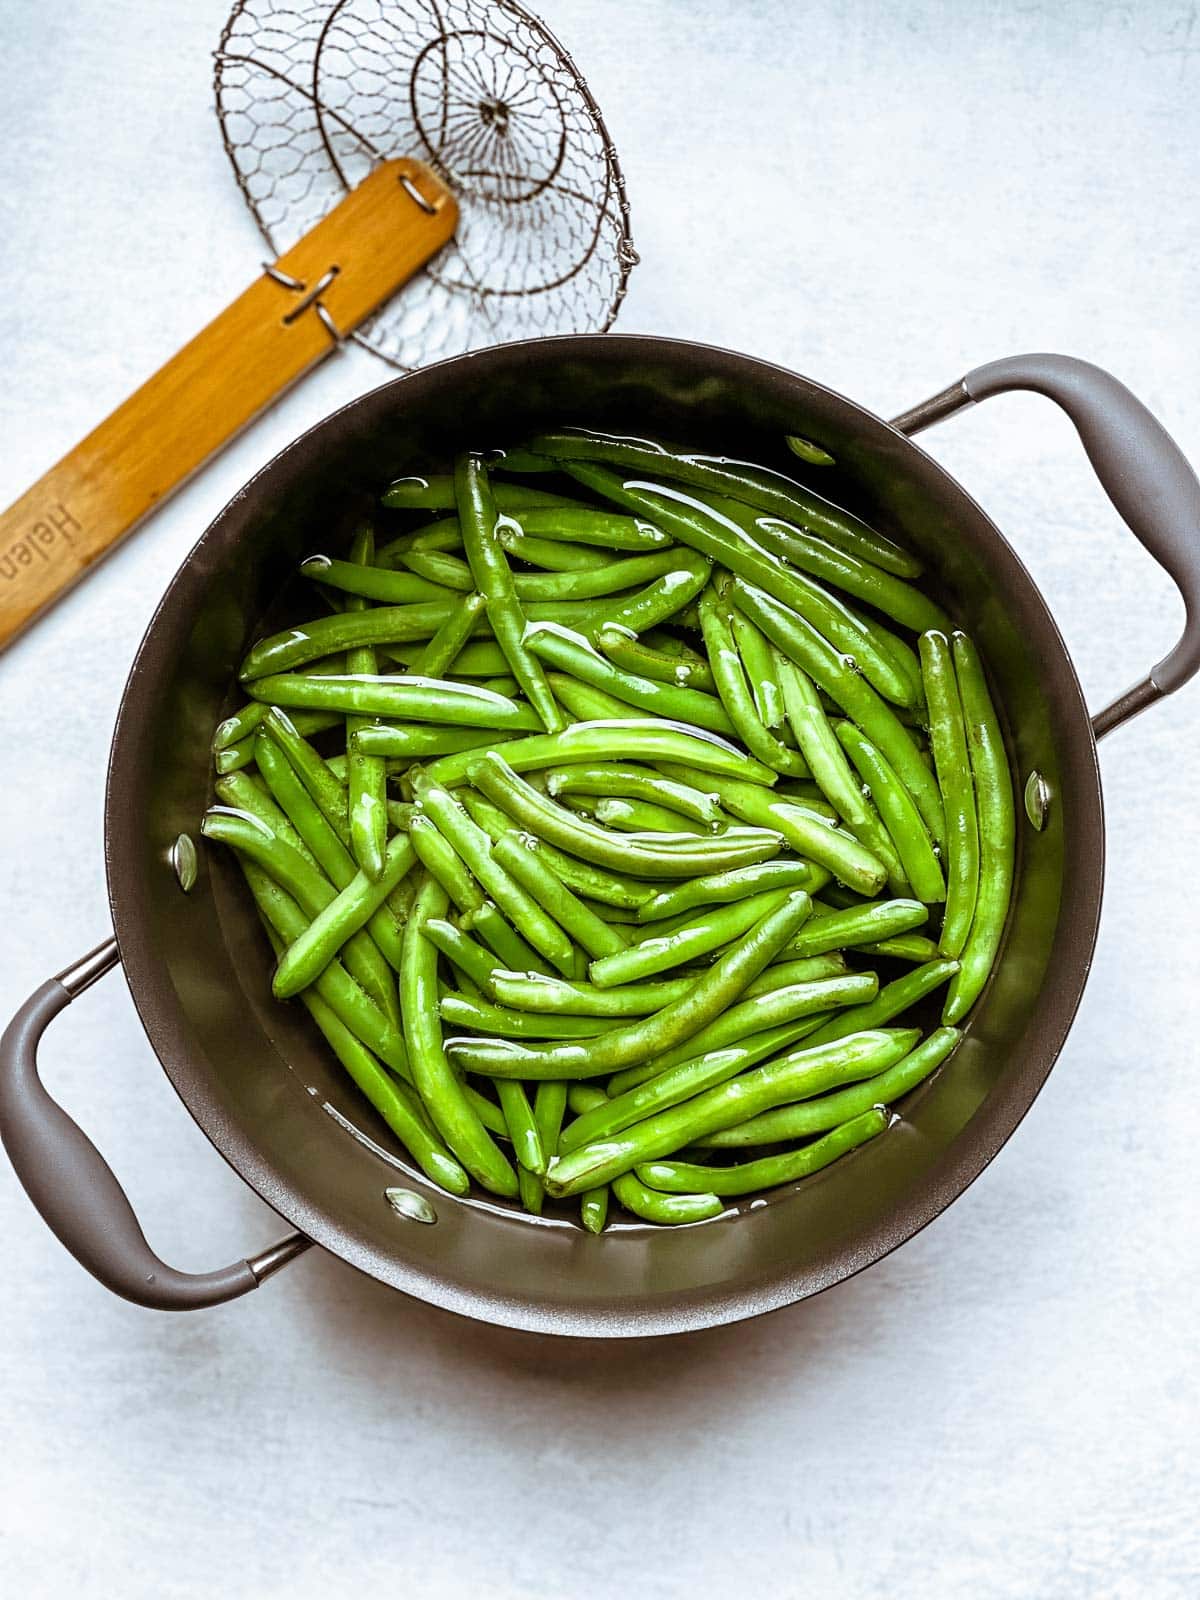 Green beans cooking in water in a pot with a spider strainer on the side.